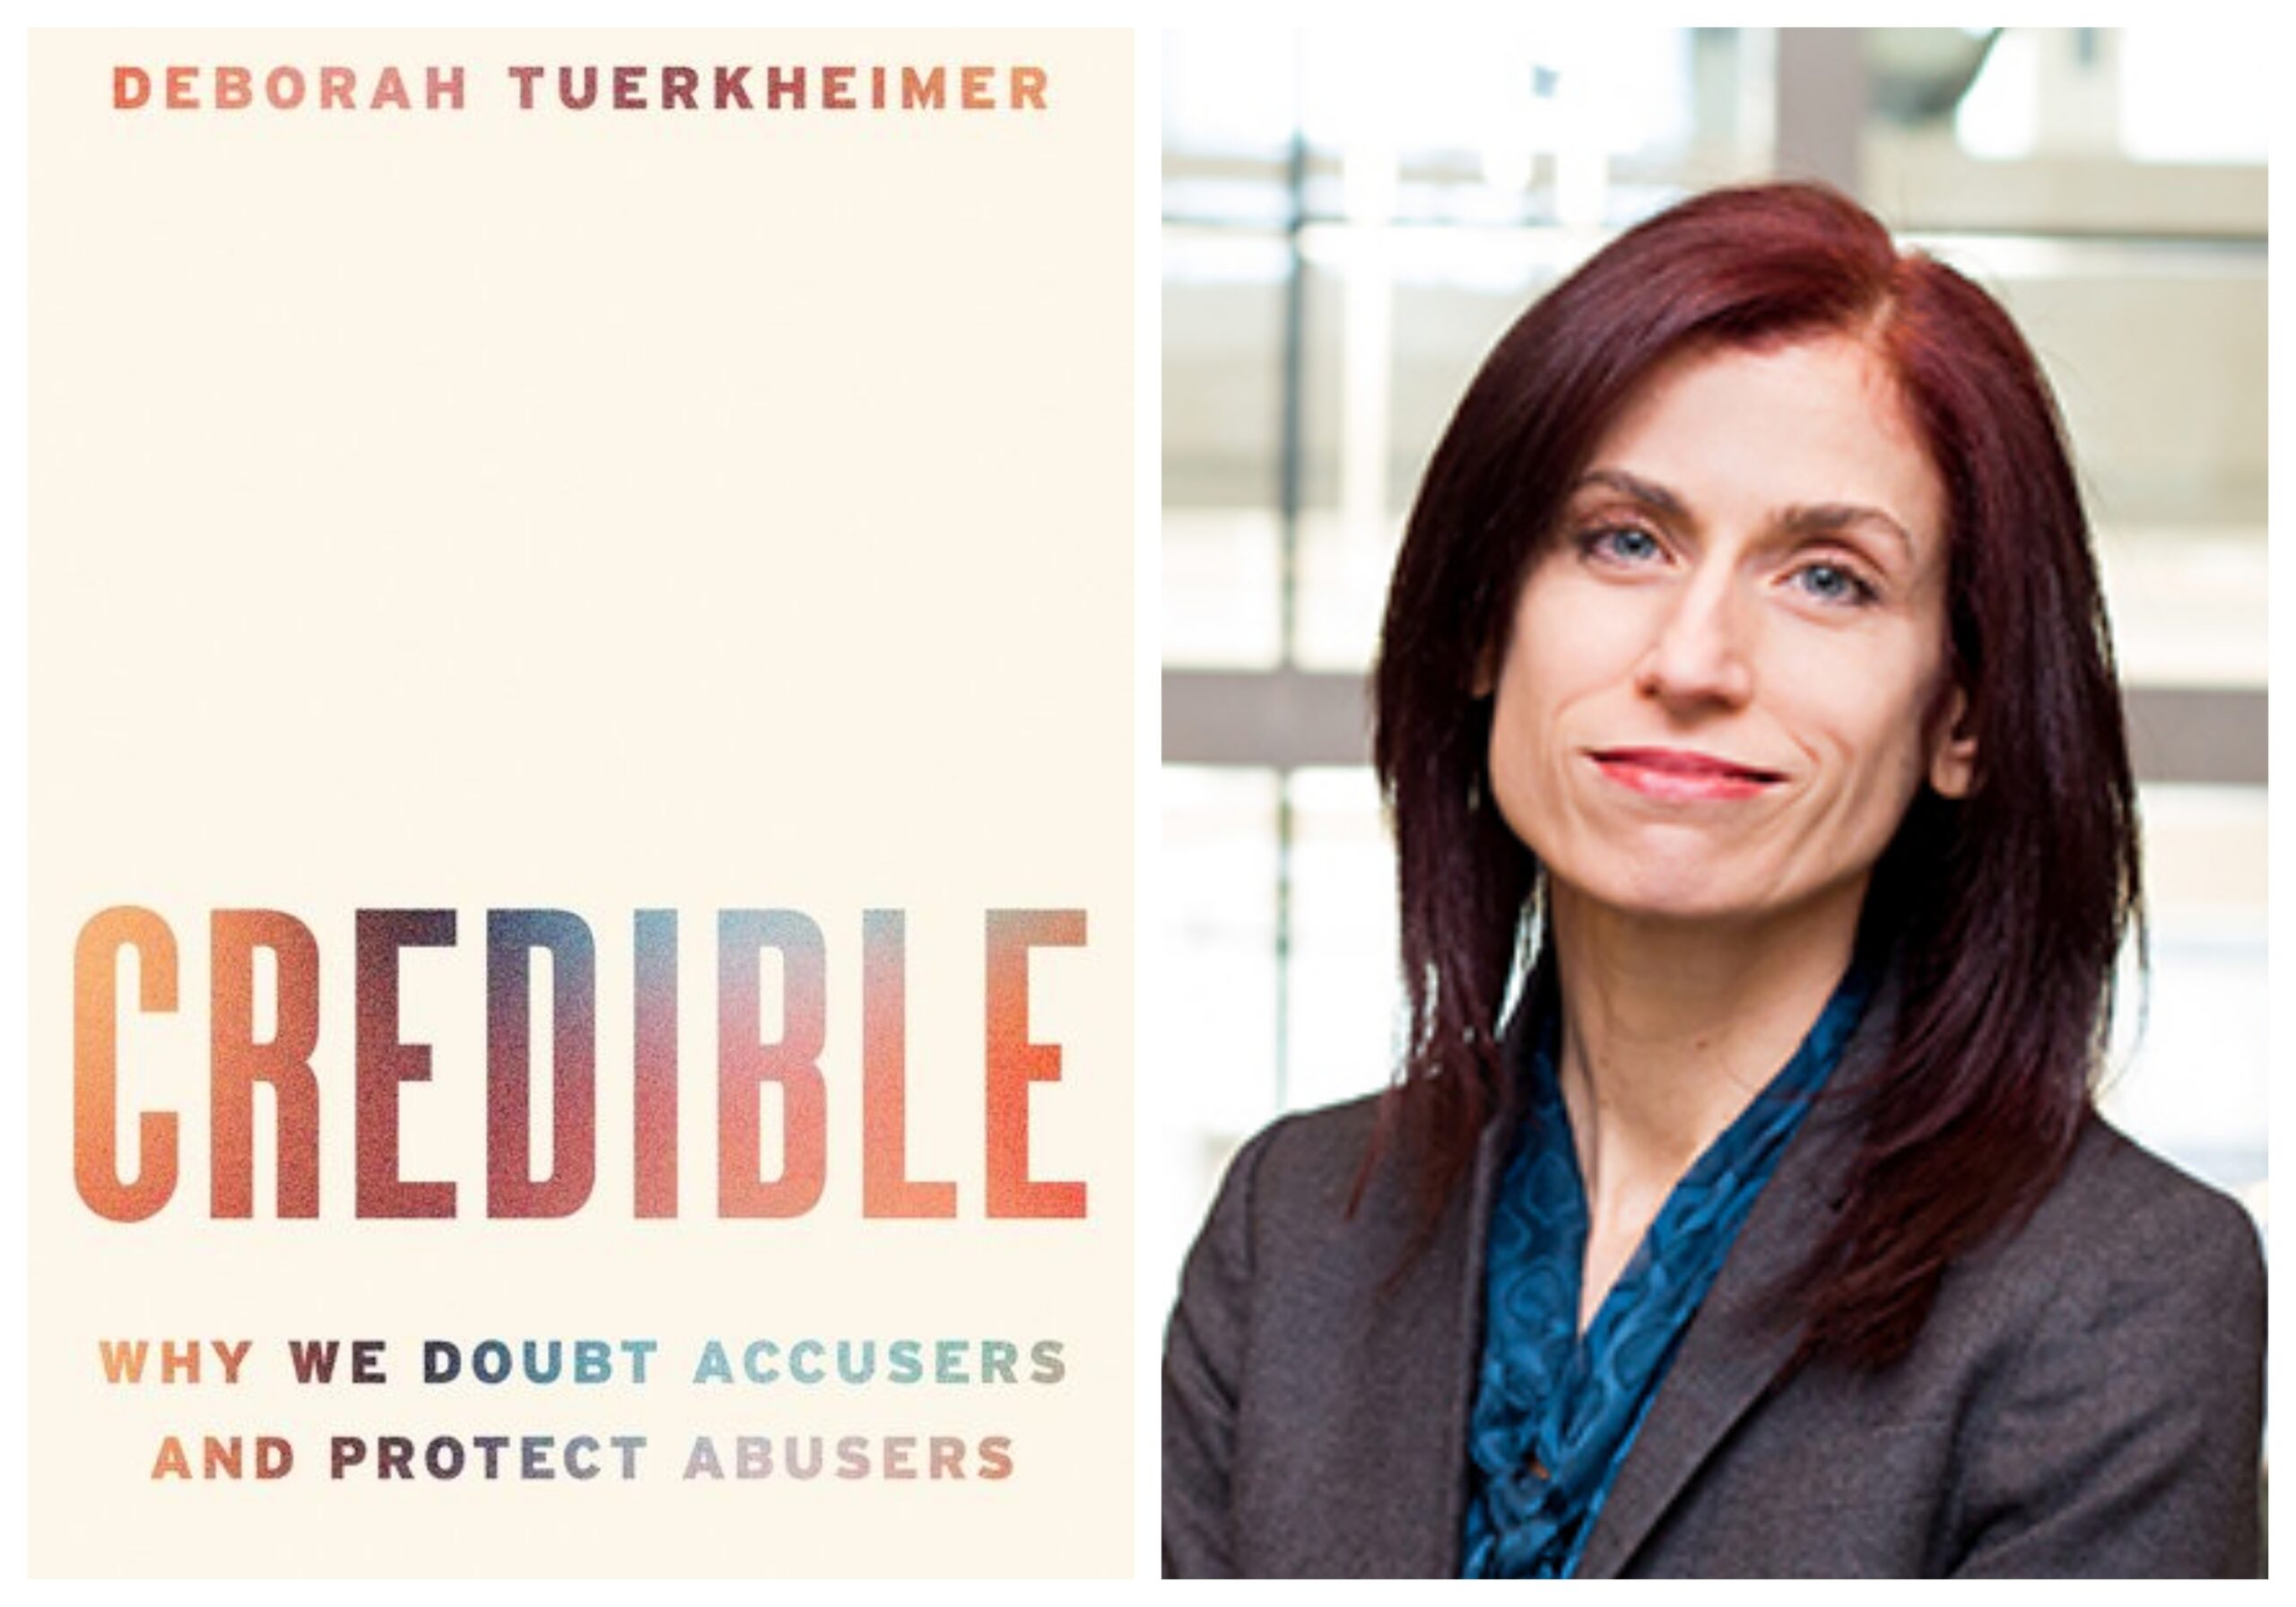 Deborah Tuerkheimer and the cover of her new book "Credible: Why We Doubt Accusers and Protect Abusers."